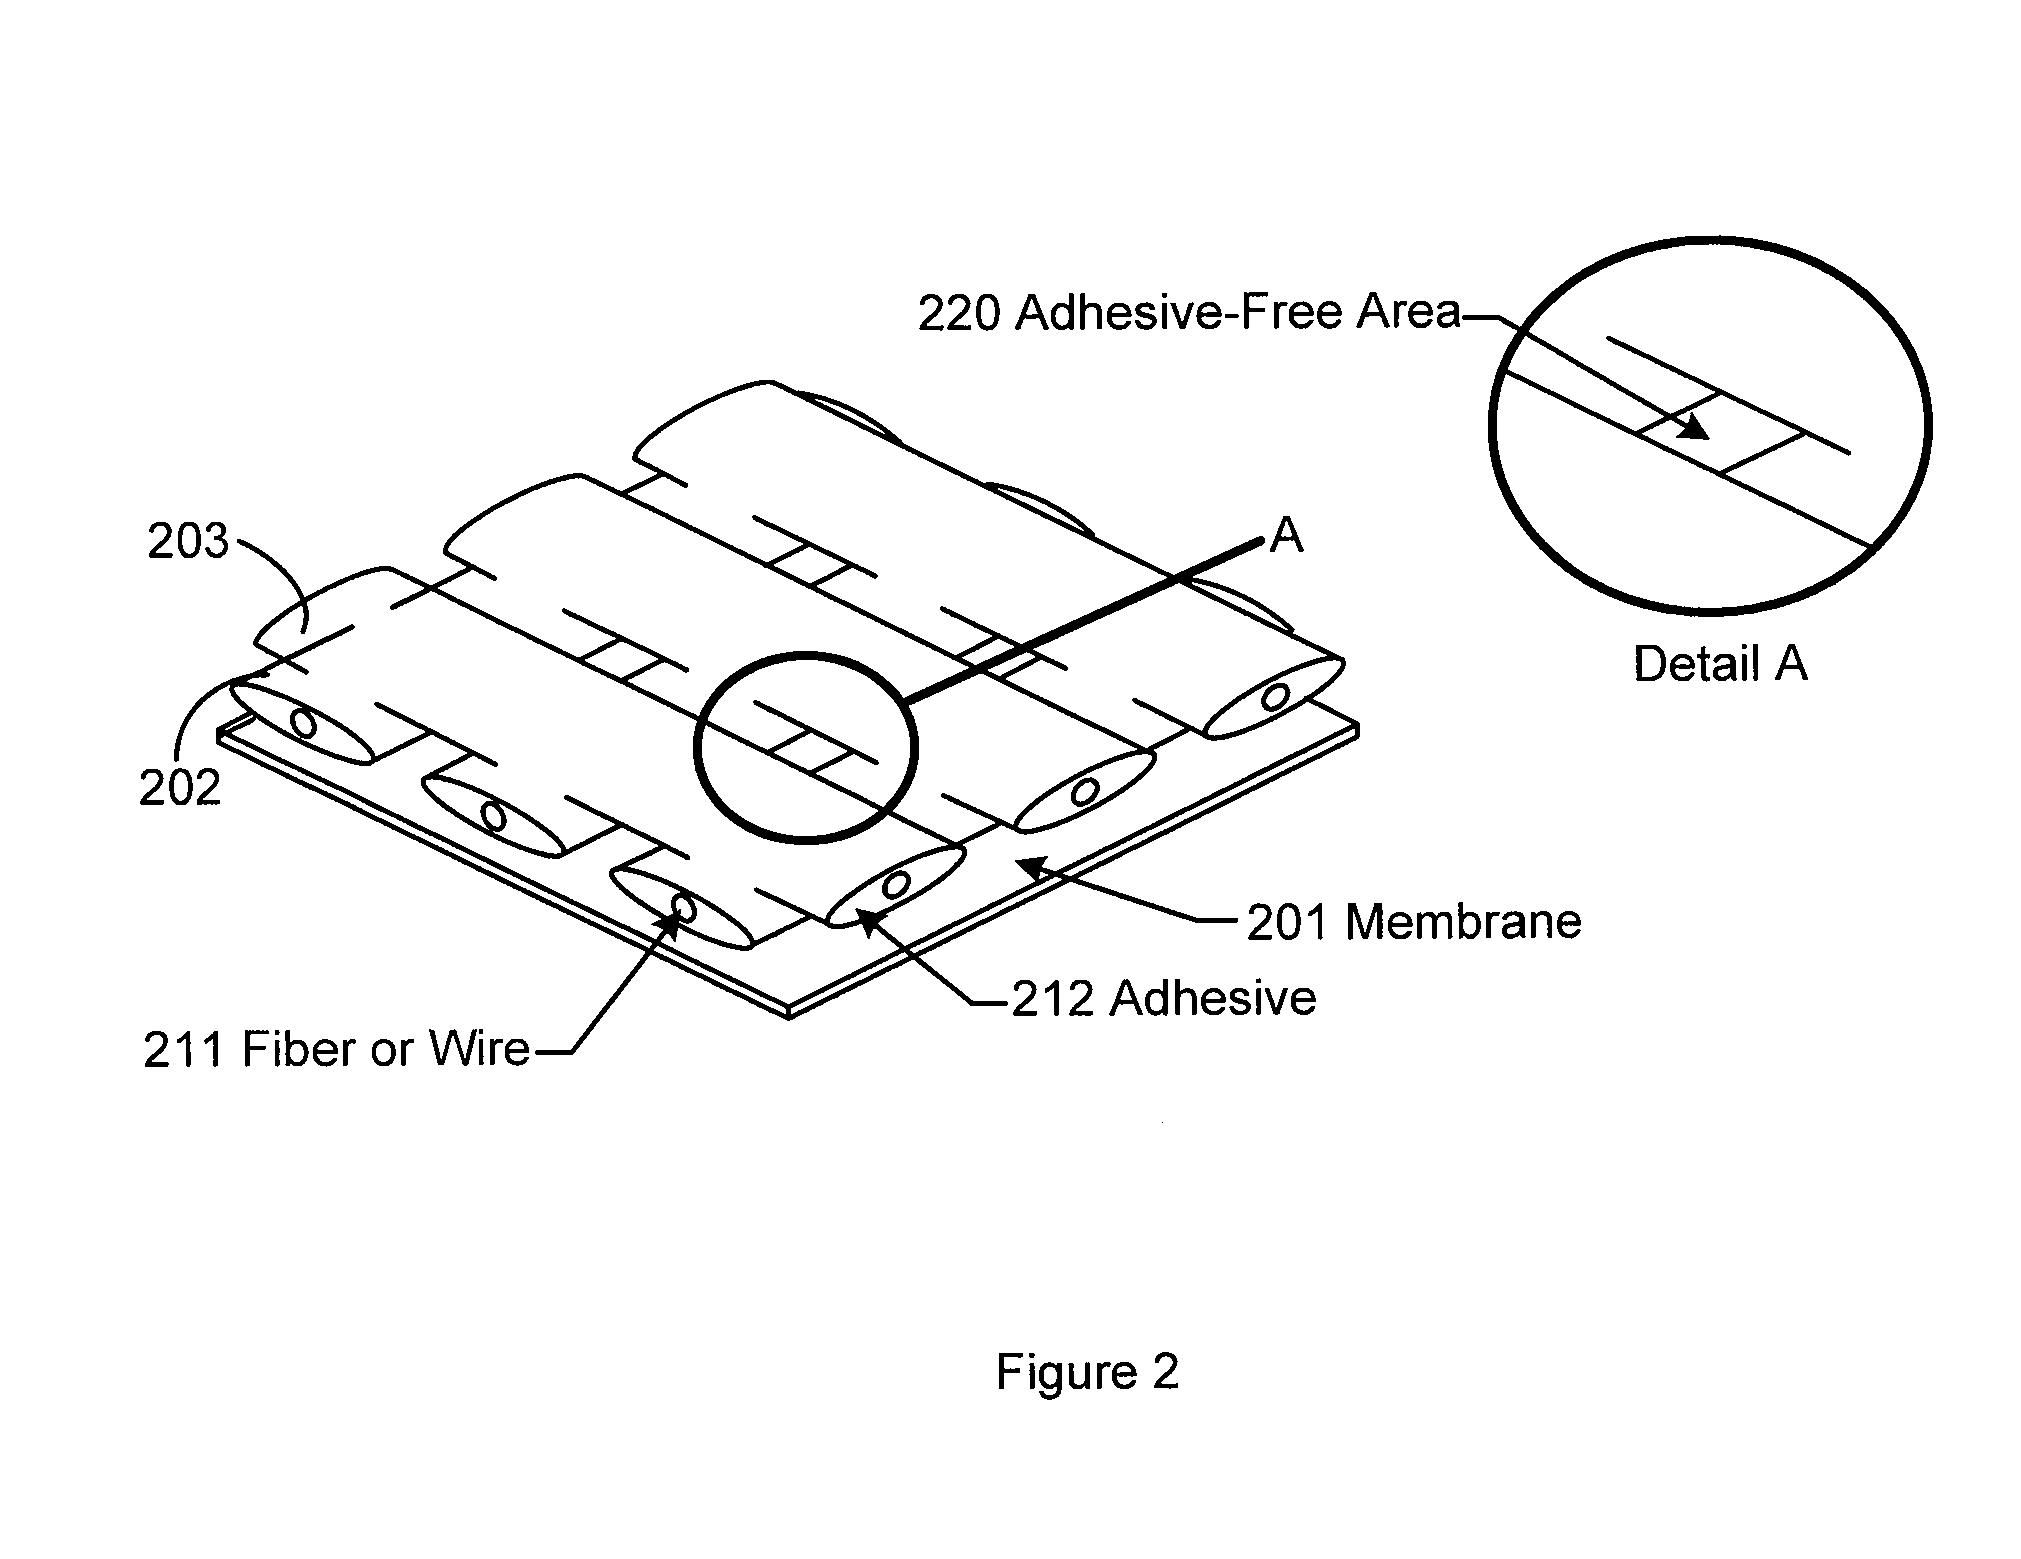 Waterproof breathable composite materials for fabrication of flexible membranes and other articles